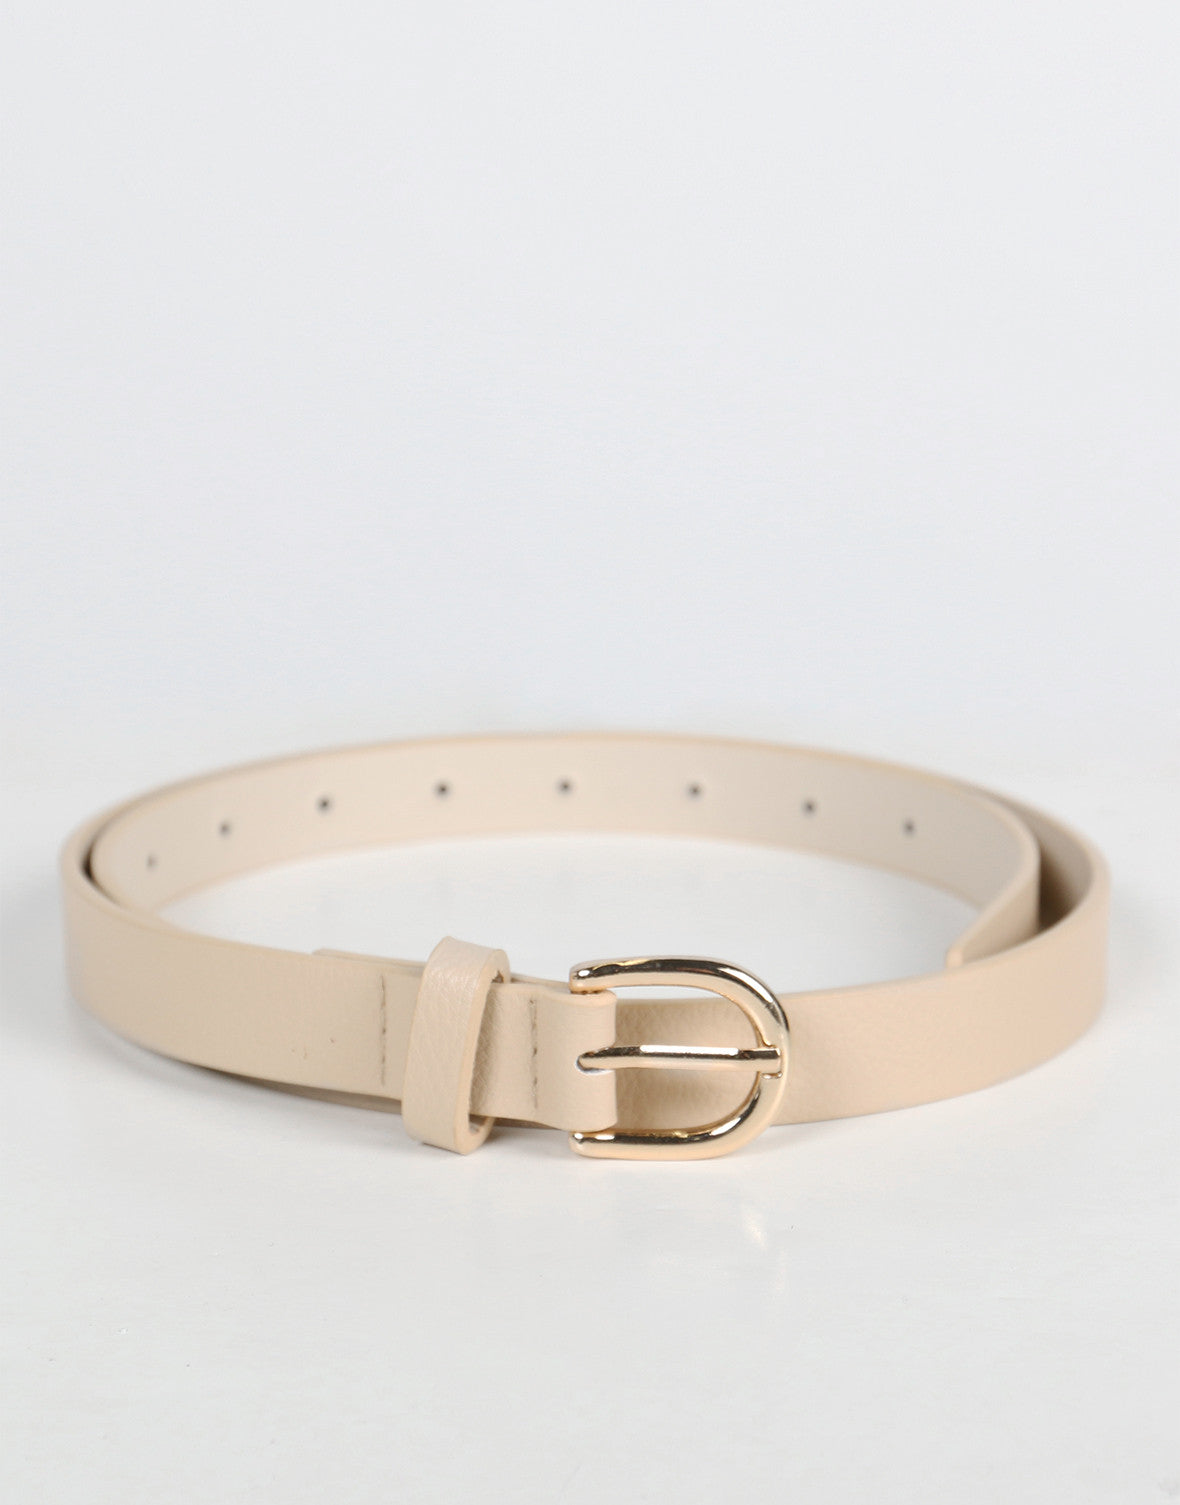 The Simple Leather Belt – 2020AVE